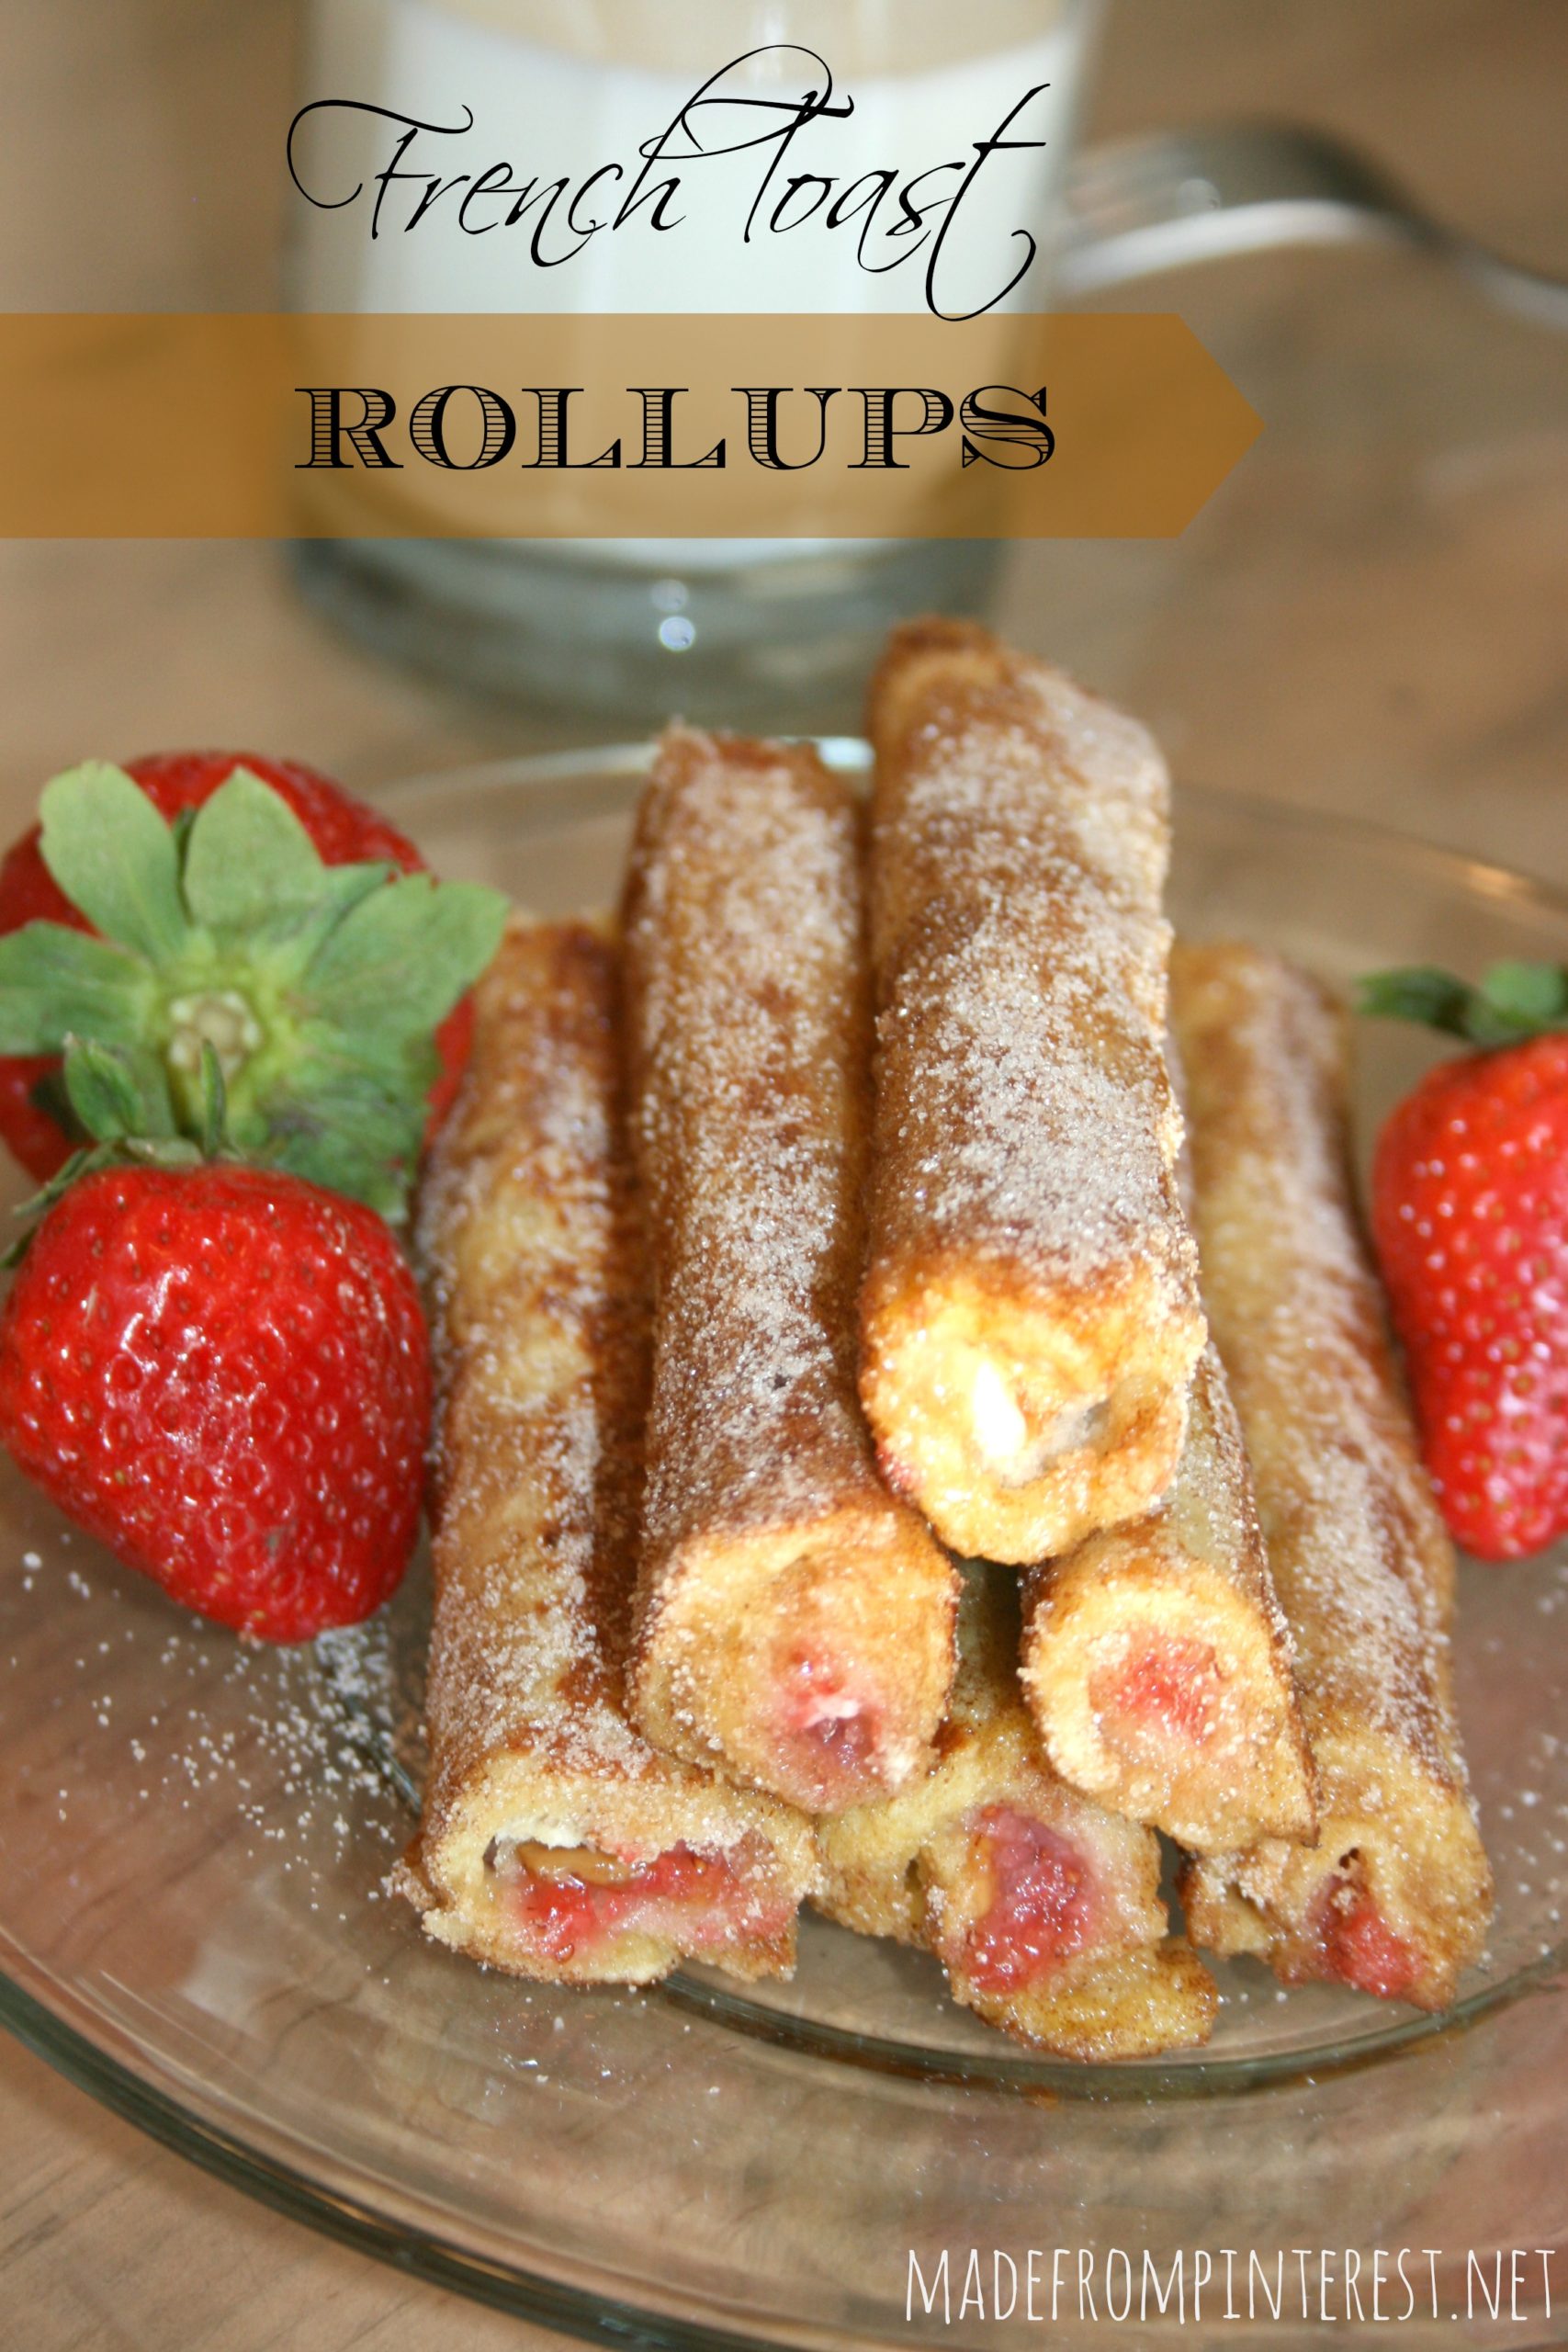 Nutella Roll Ups with Peanut Butter, Cream Cheese, and Cinnamon Sugar